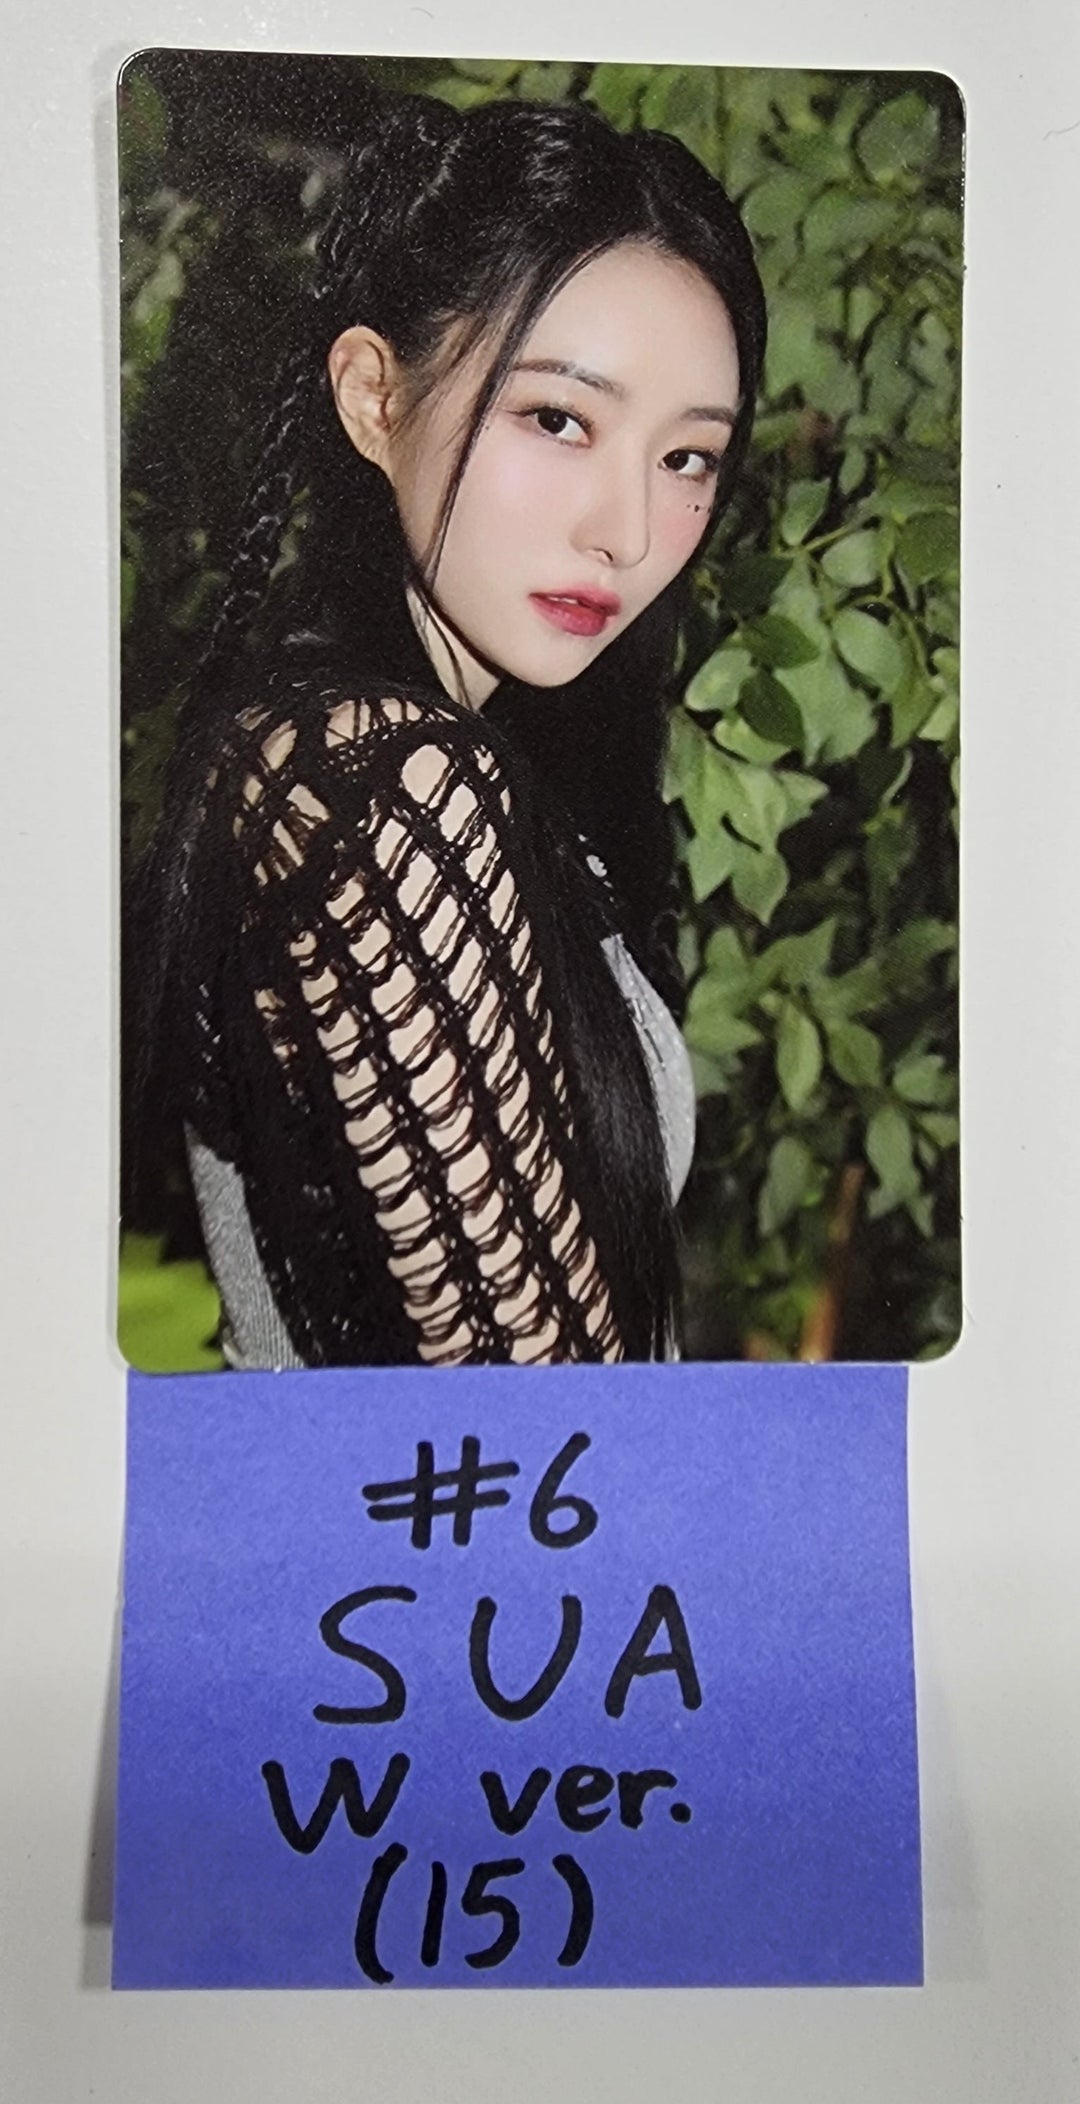 Dreamcatcher "Apocalypse : From us" - Official Photocards [W Ver.] [Limited Ver.] (Restocked 7/26)